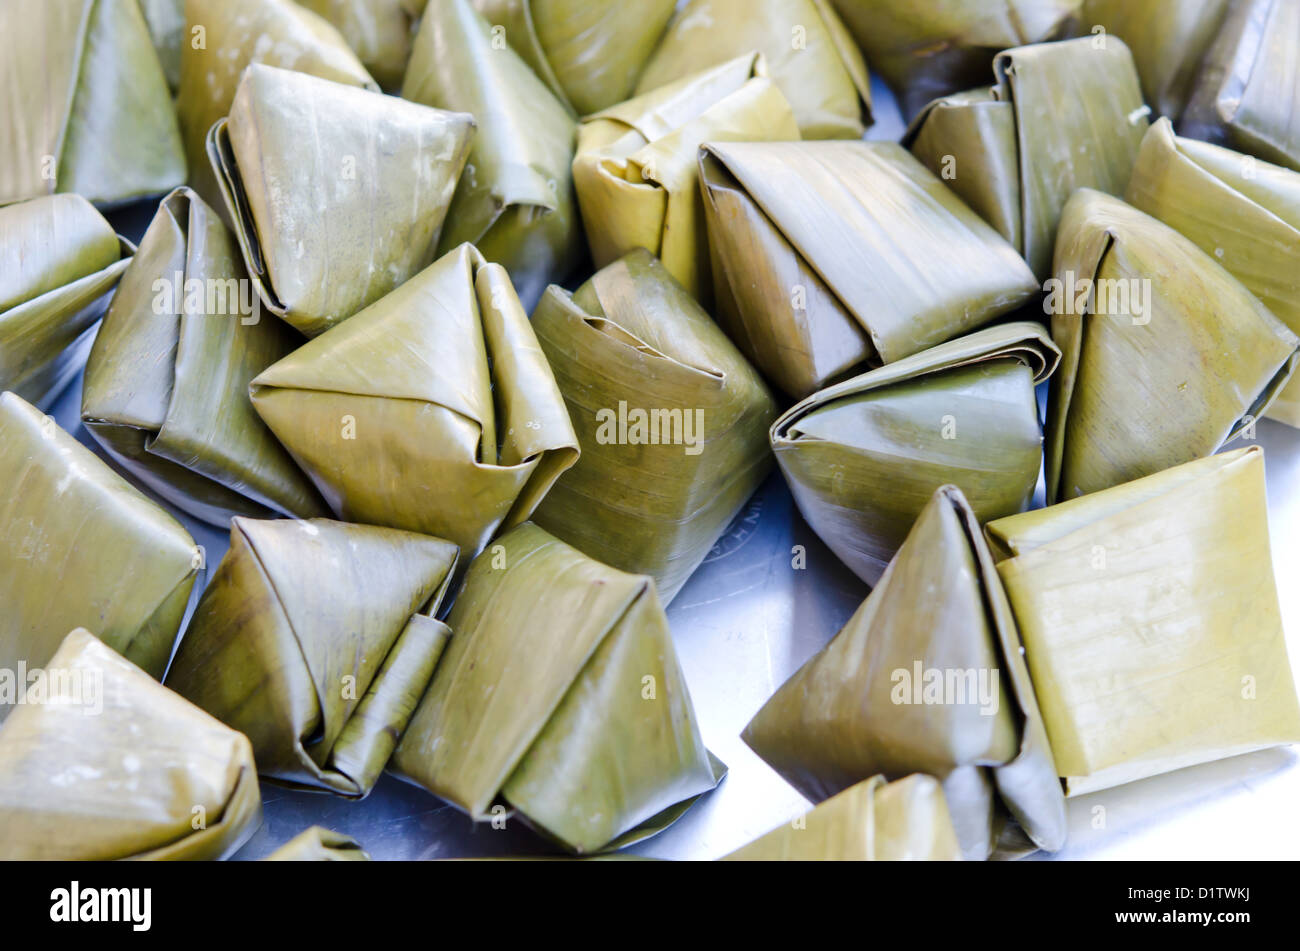 Sweet sticky rice in banana leaf package Stock Photo